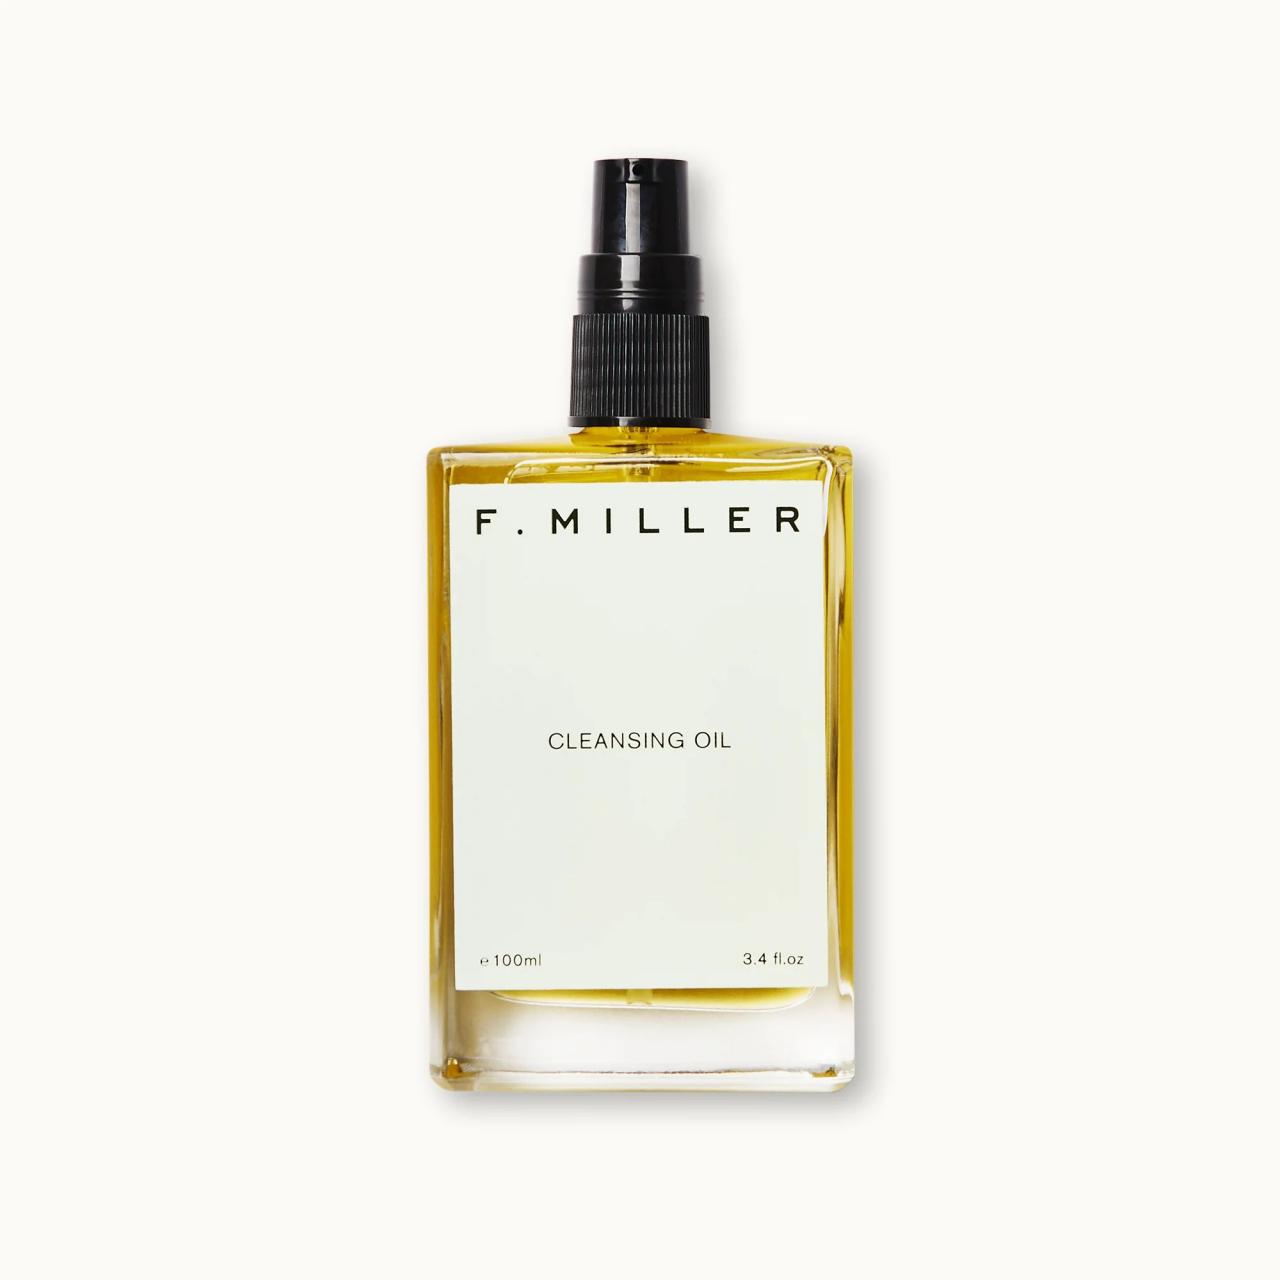 F Miller Skincare, A Comprehensive Guide to Products, Ingredients, and Brand Values